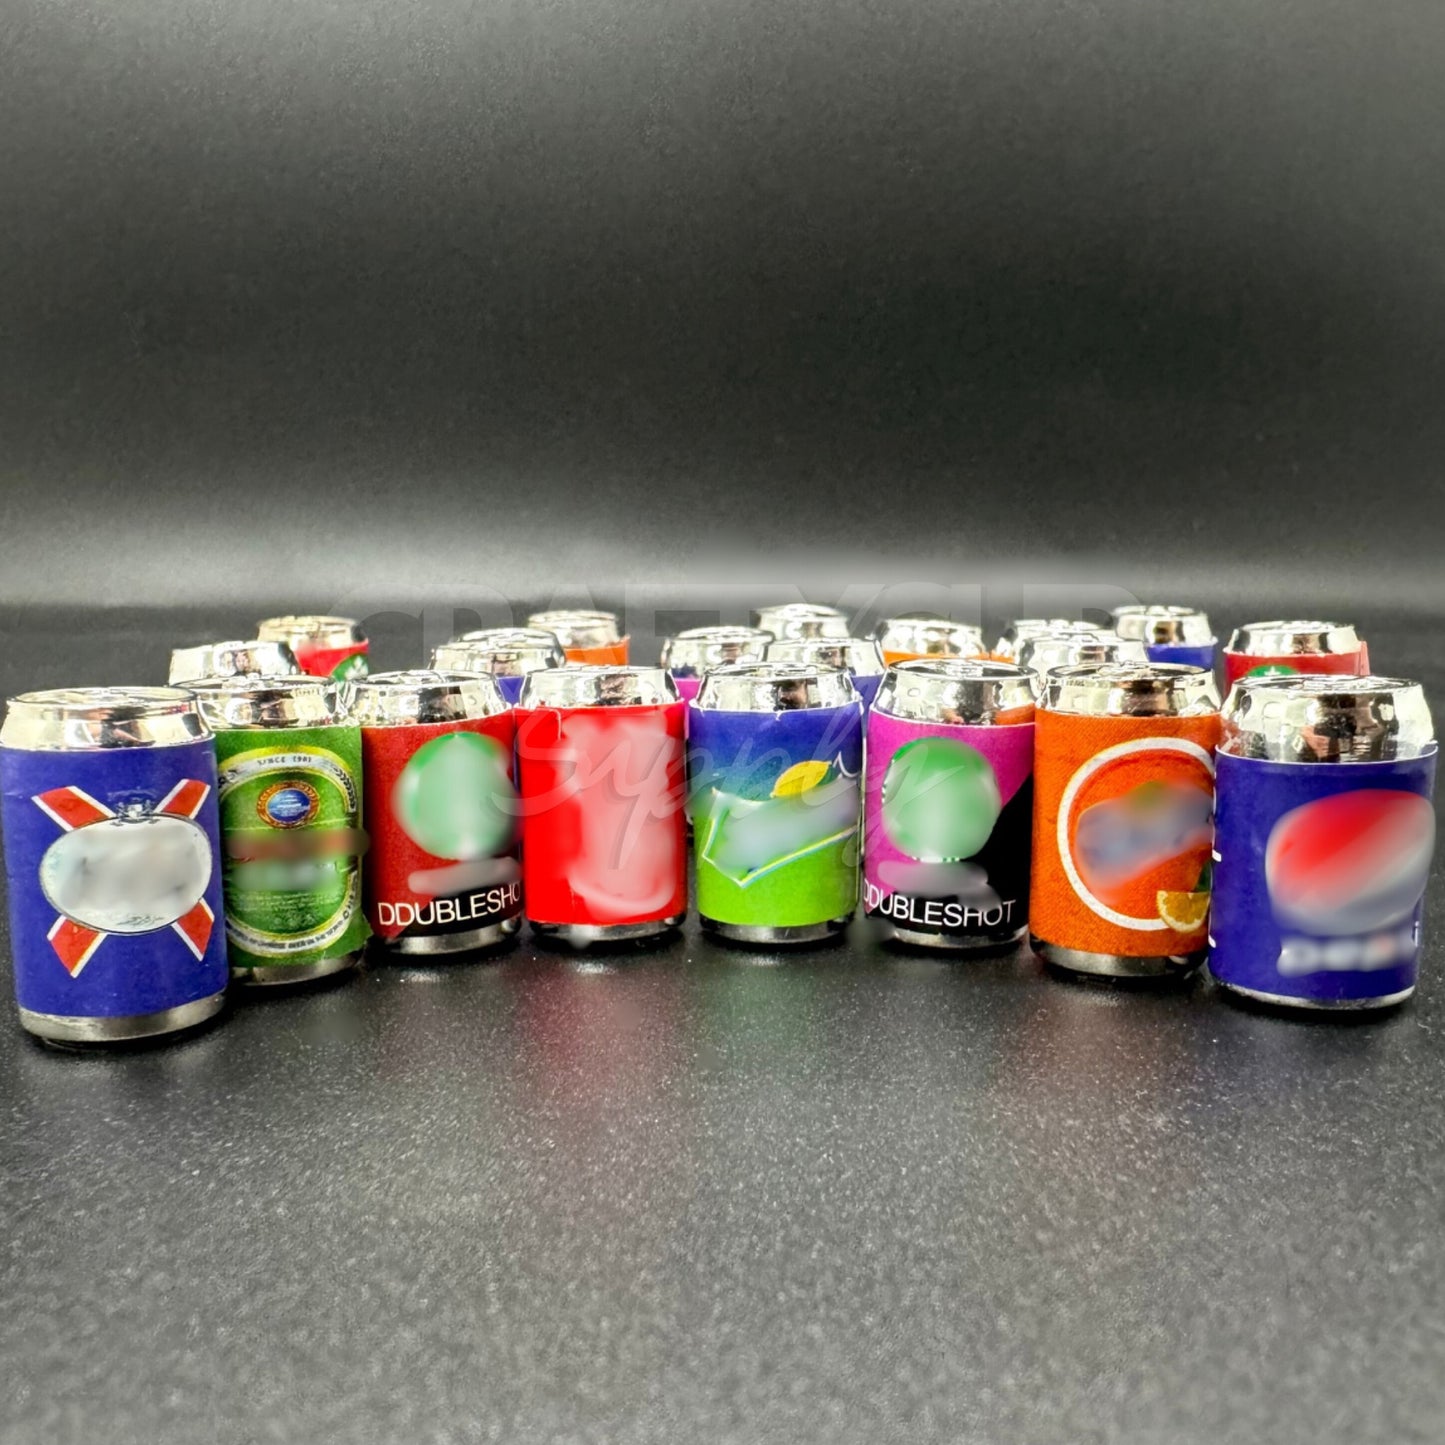 Miniature doll house cans